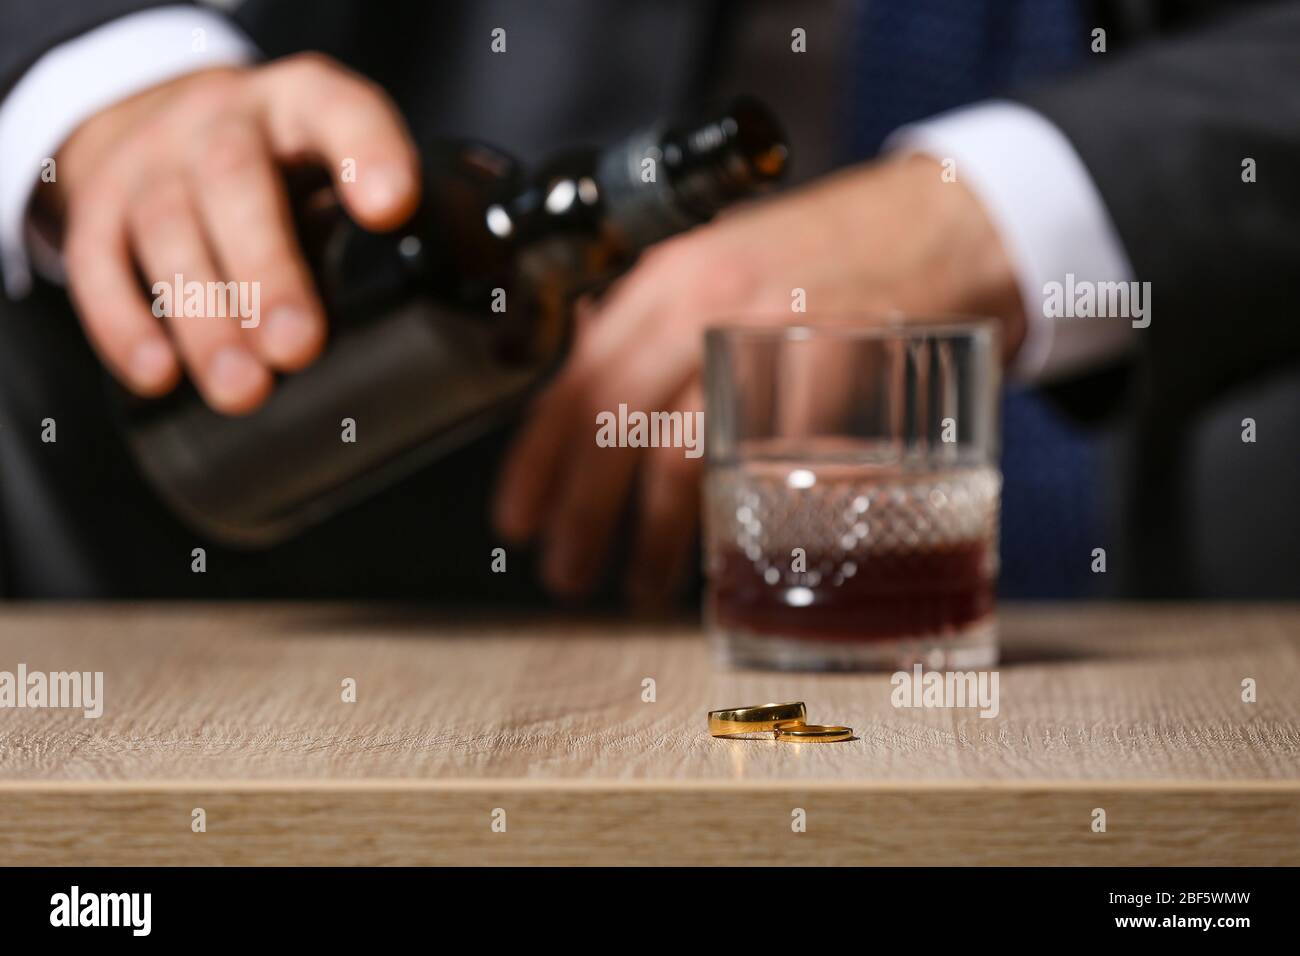 Divorced man drinking cognac at home. Concept of alcoholism Stock Photo